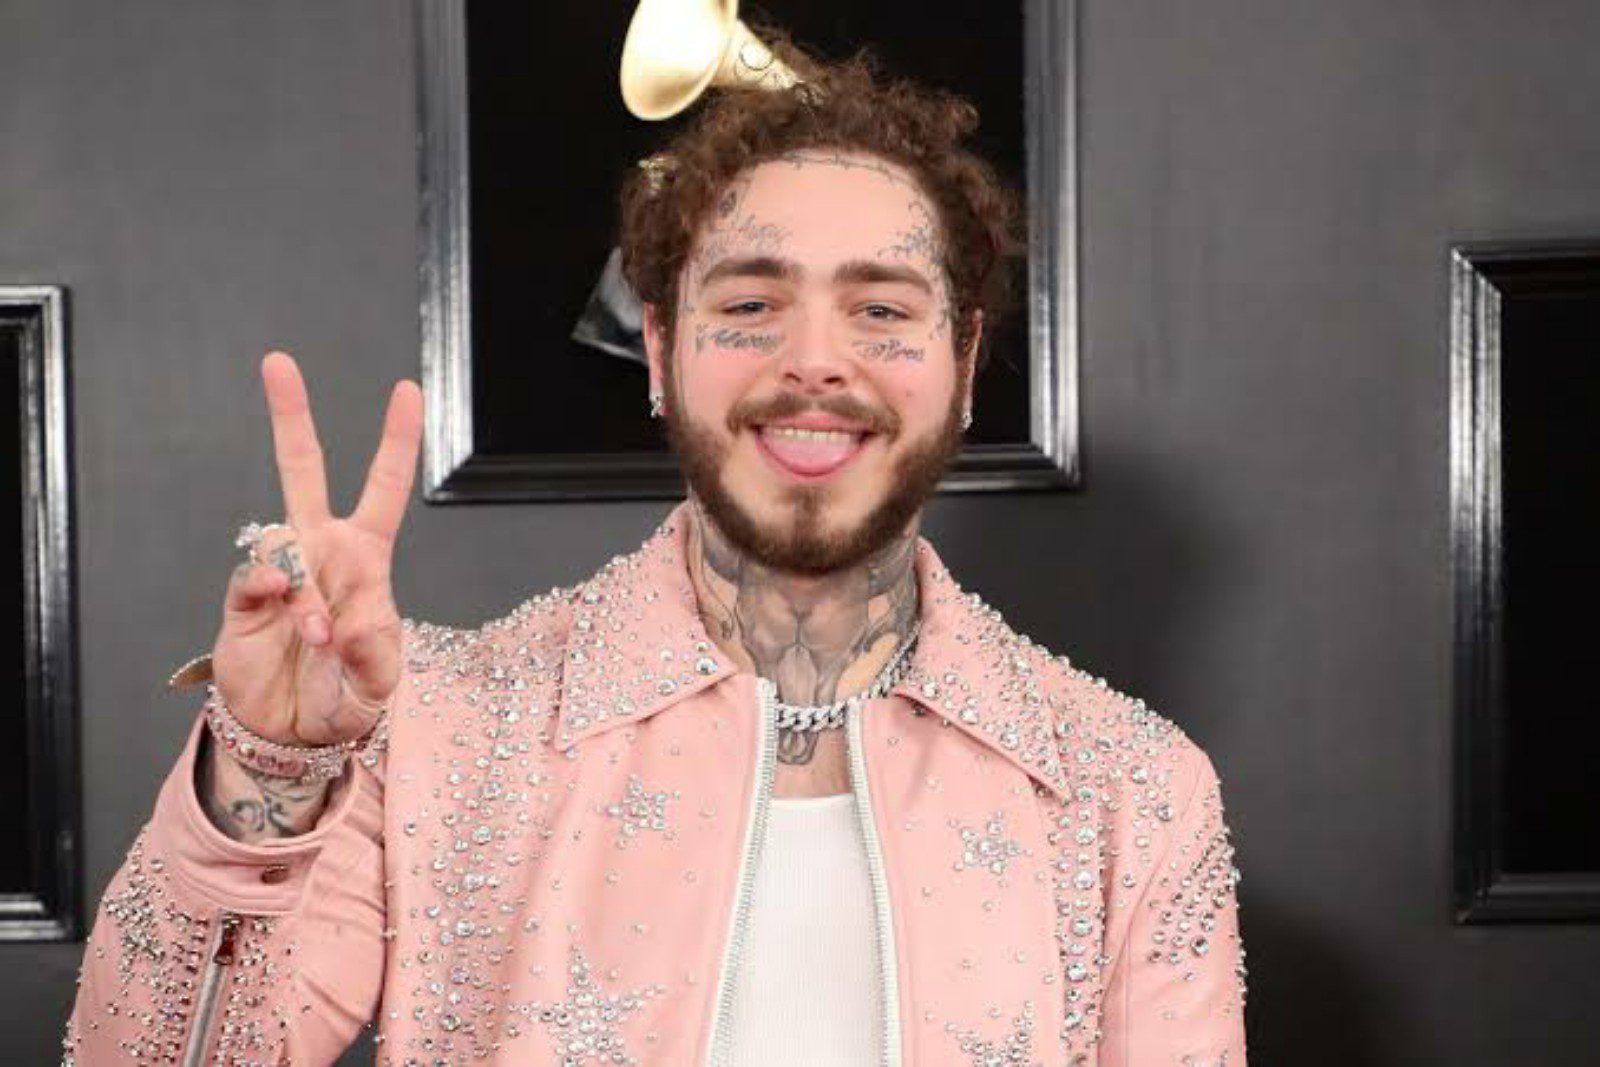 Post Malone most famous songs